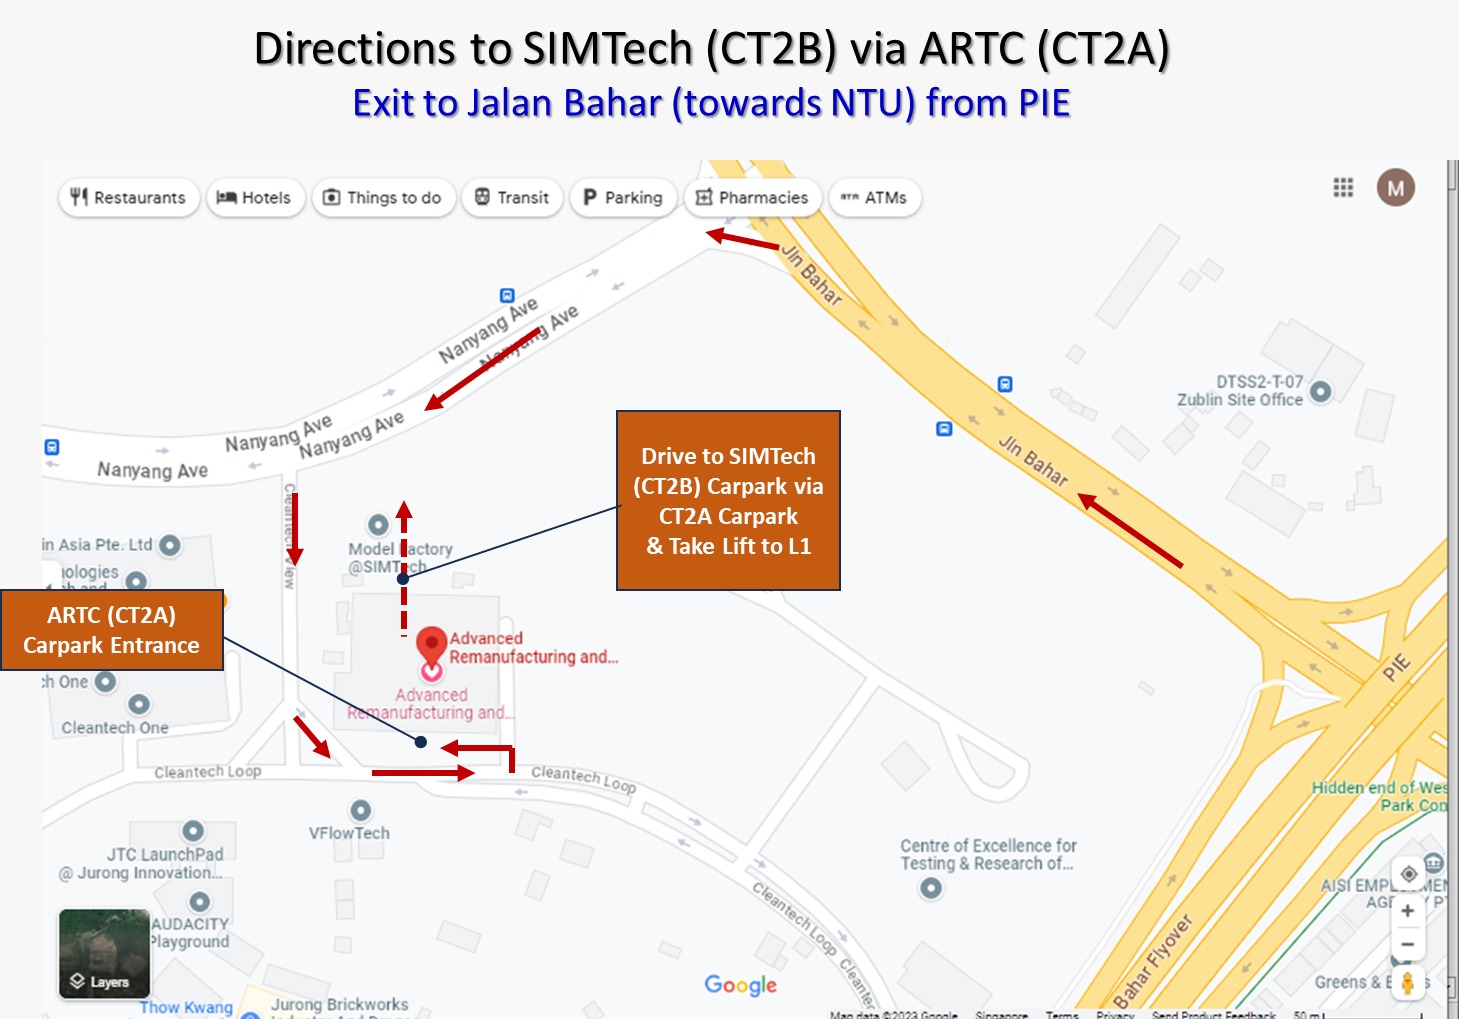 Directions to MF from ARTC